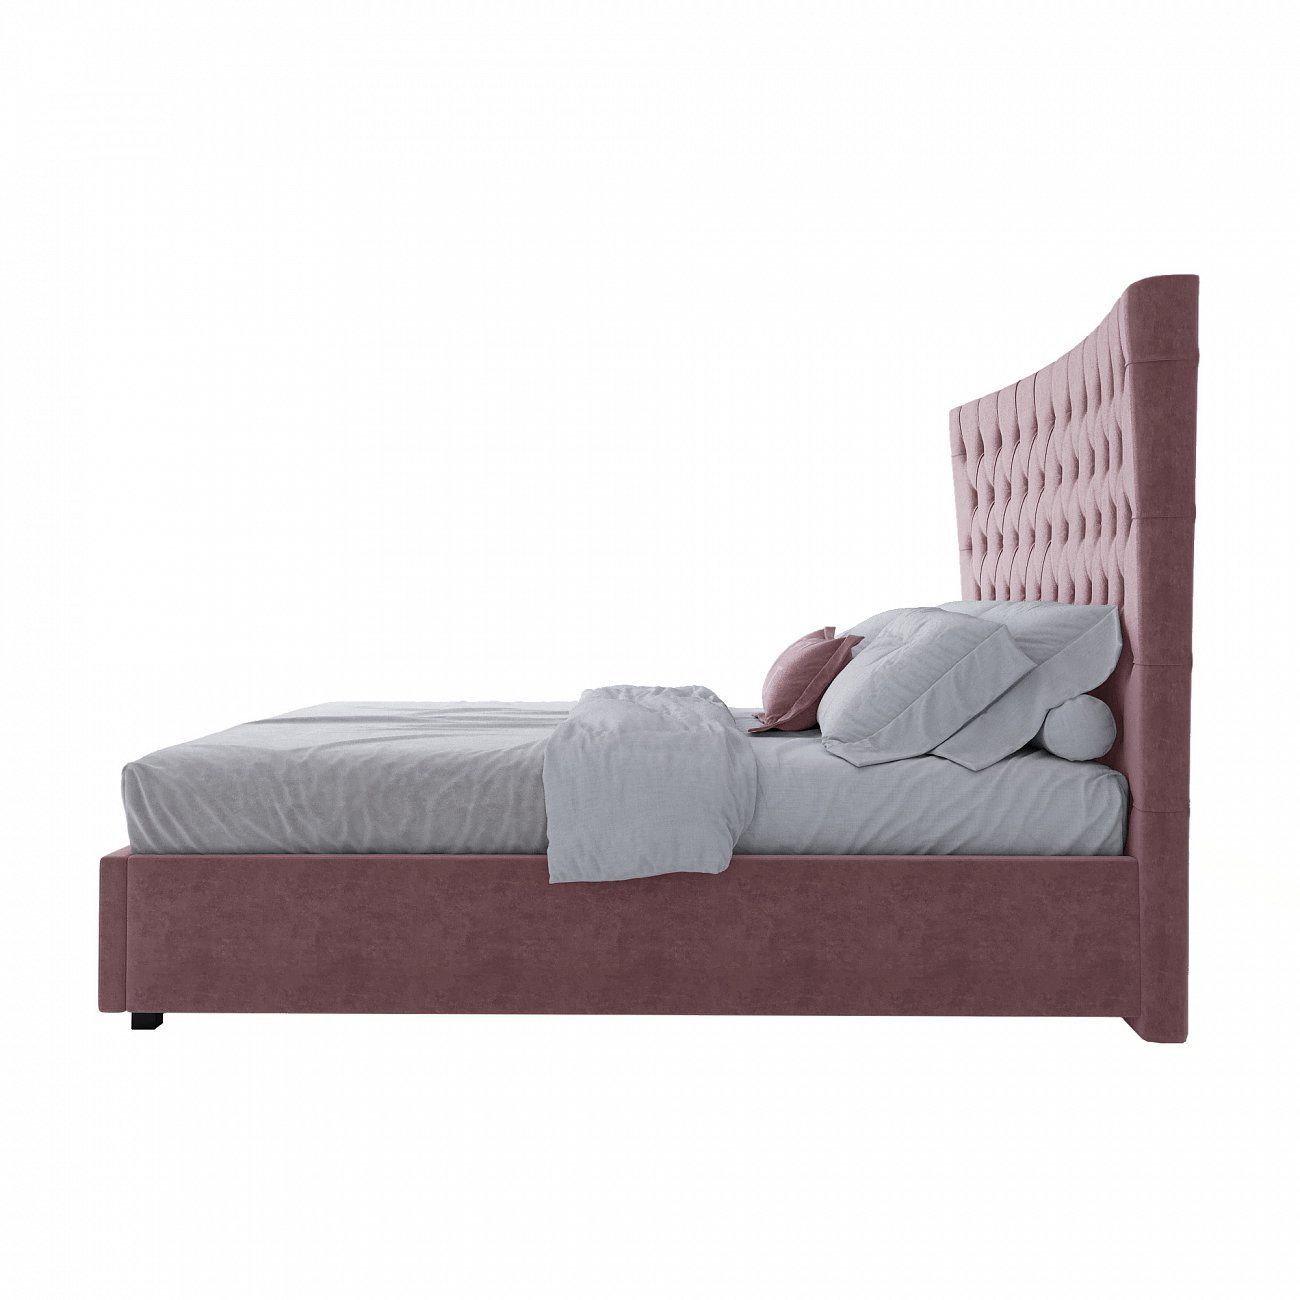 Double bed 160x200 dusty rose made of velour QuickSand